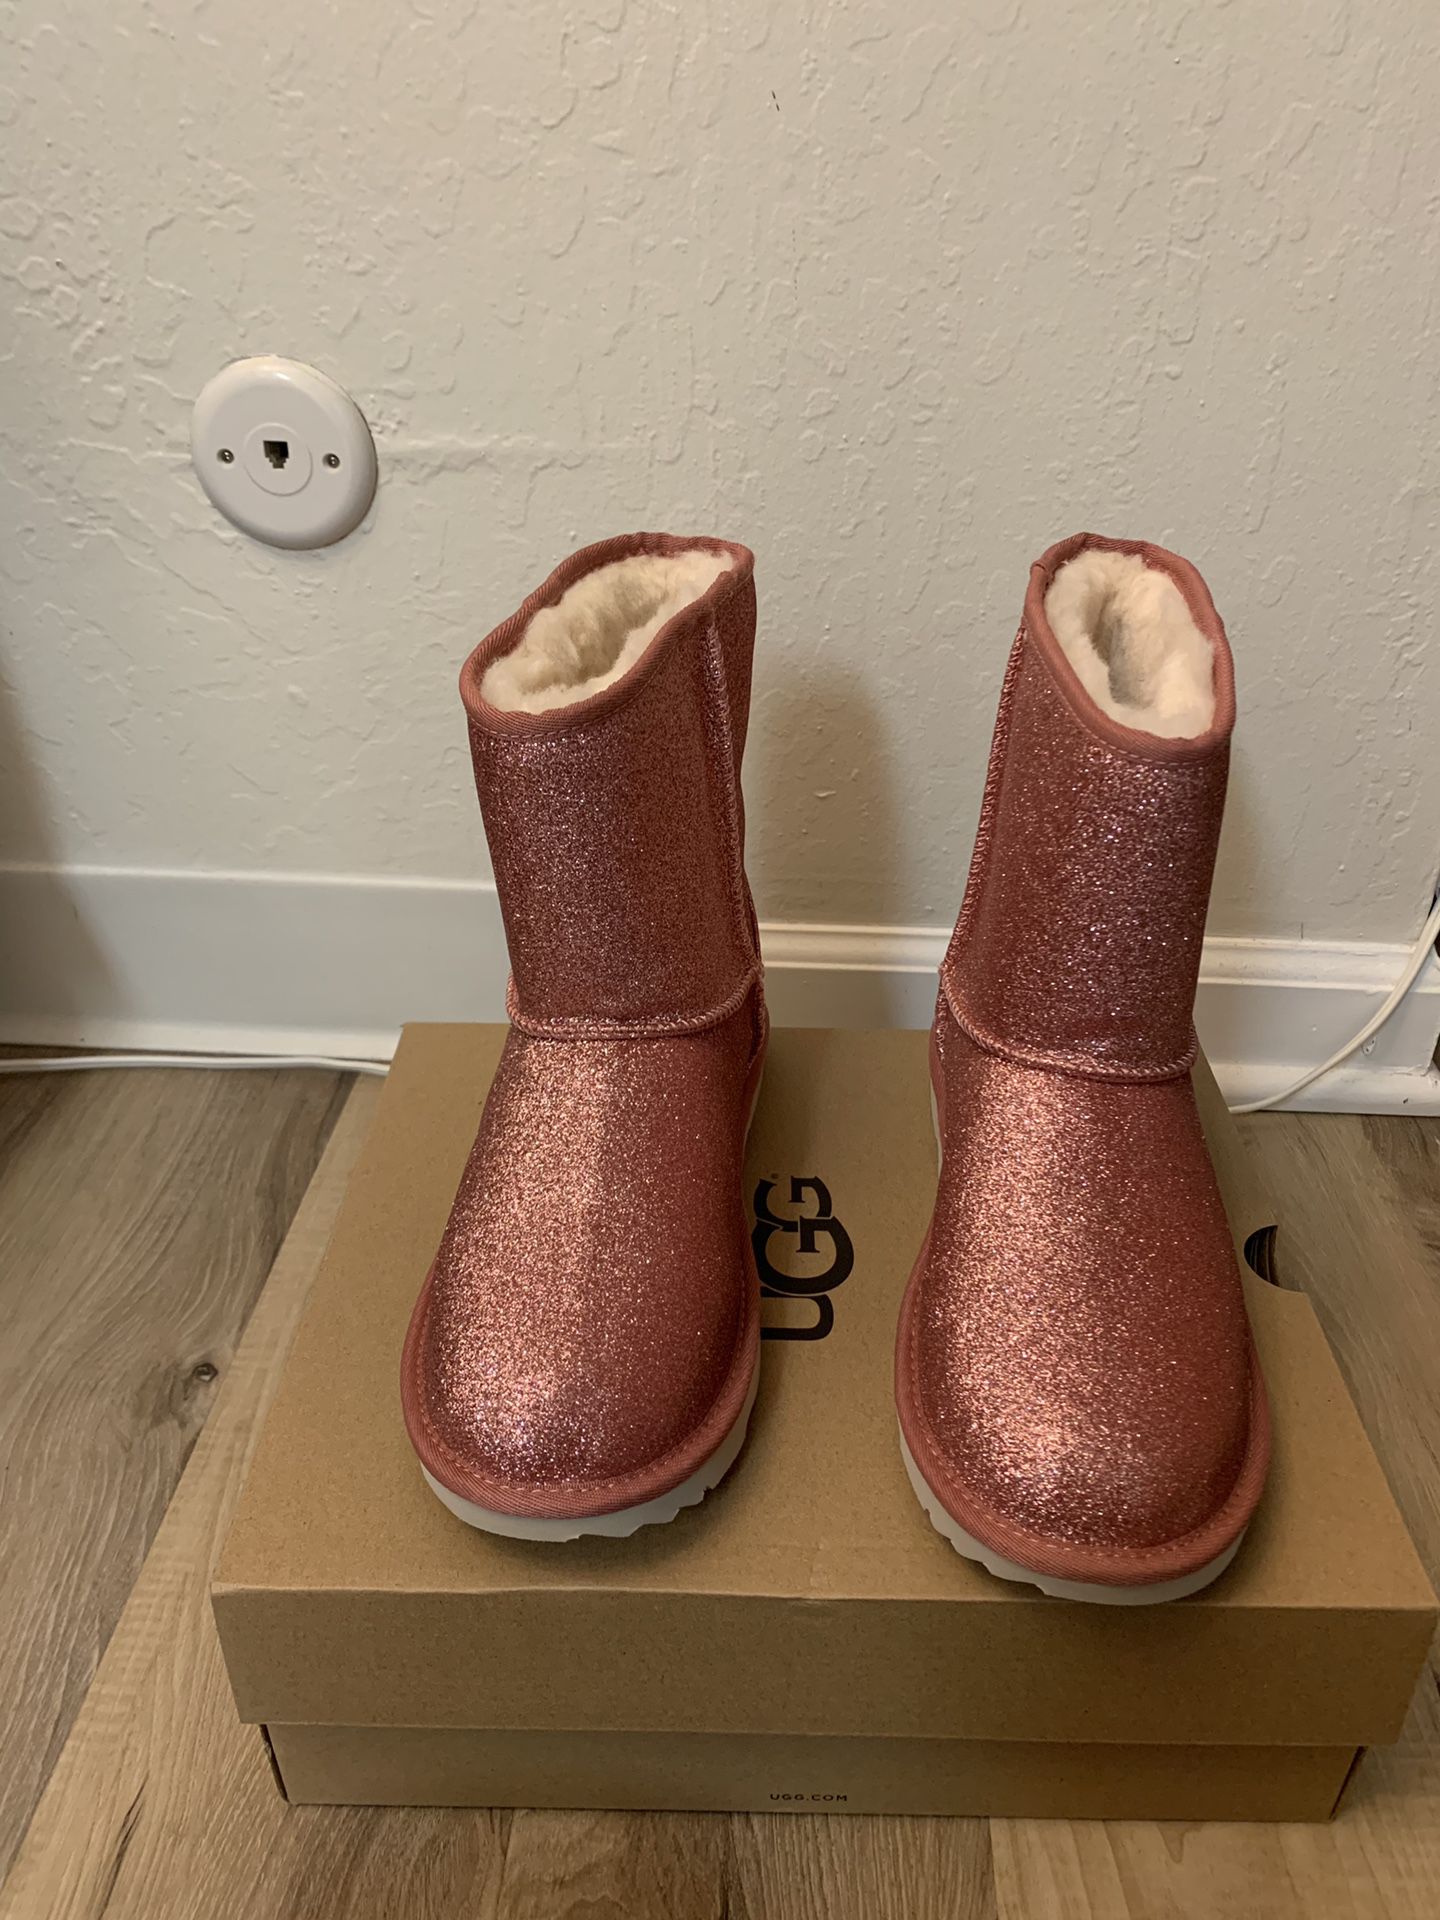 100% Authentic Brand New in Box UGG Classic Short Glitter Sparkle Boots / Women size 8 (Big kids 6)